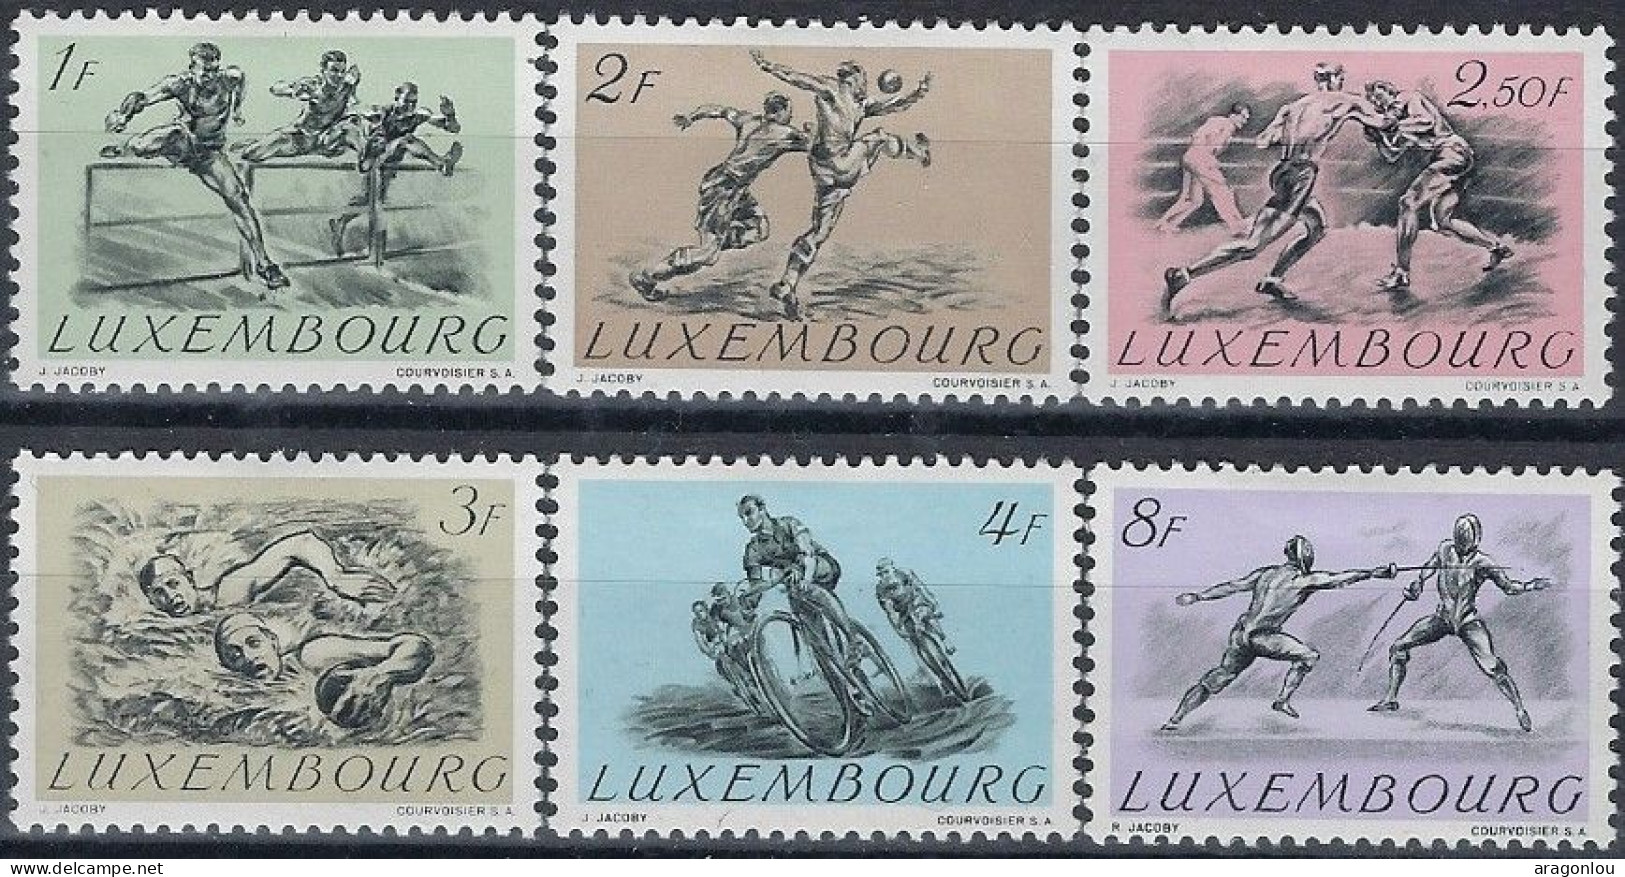 Luxembourg - Luxemburg -  Timbre   Série  Olympique   1952   VC. 50,-   * - Gebraucht